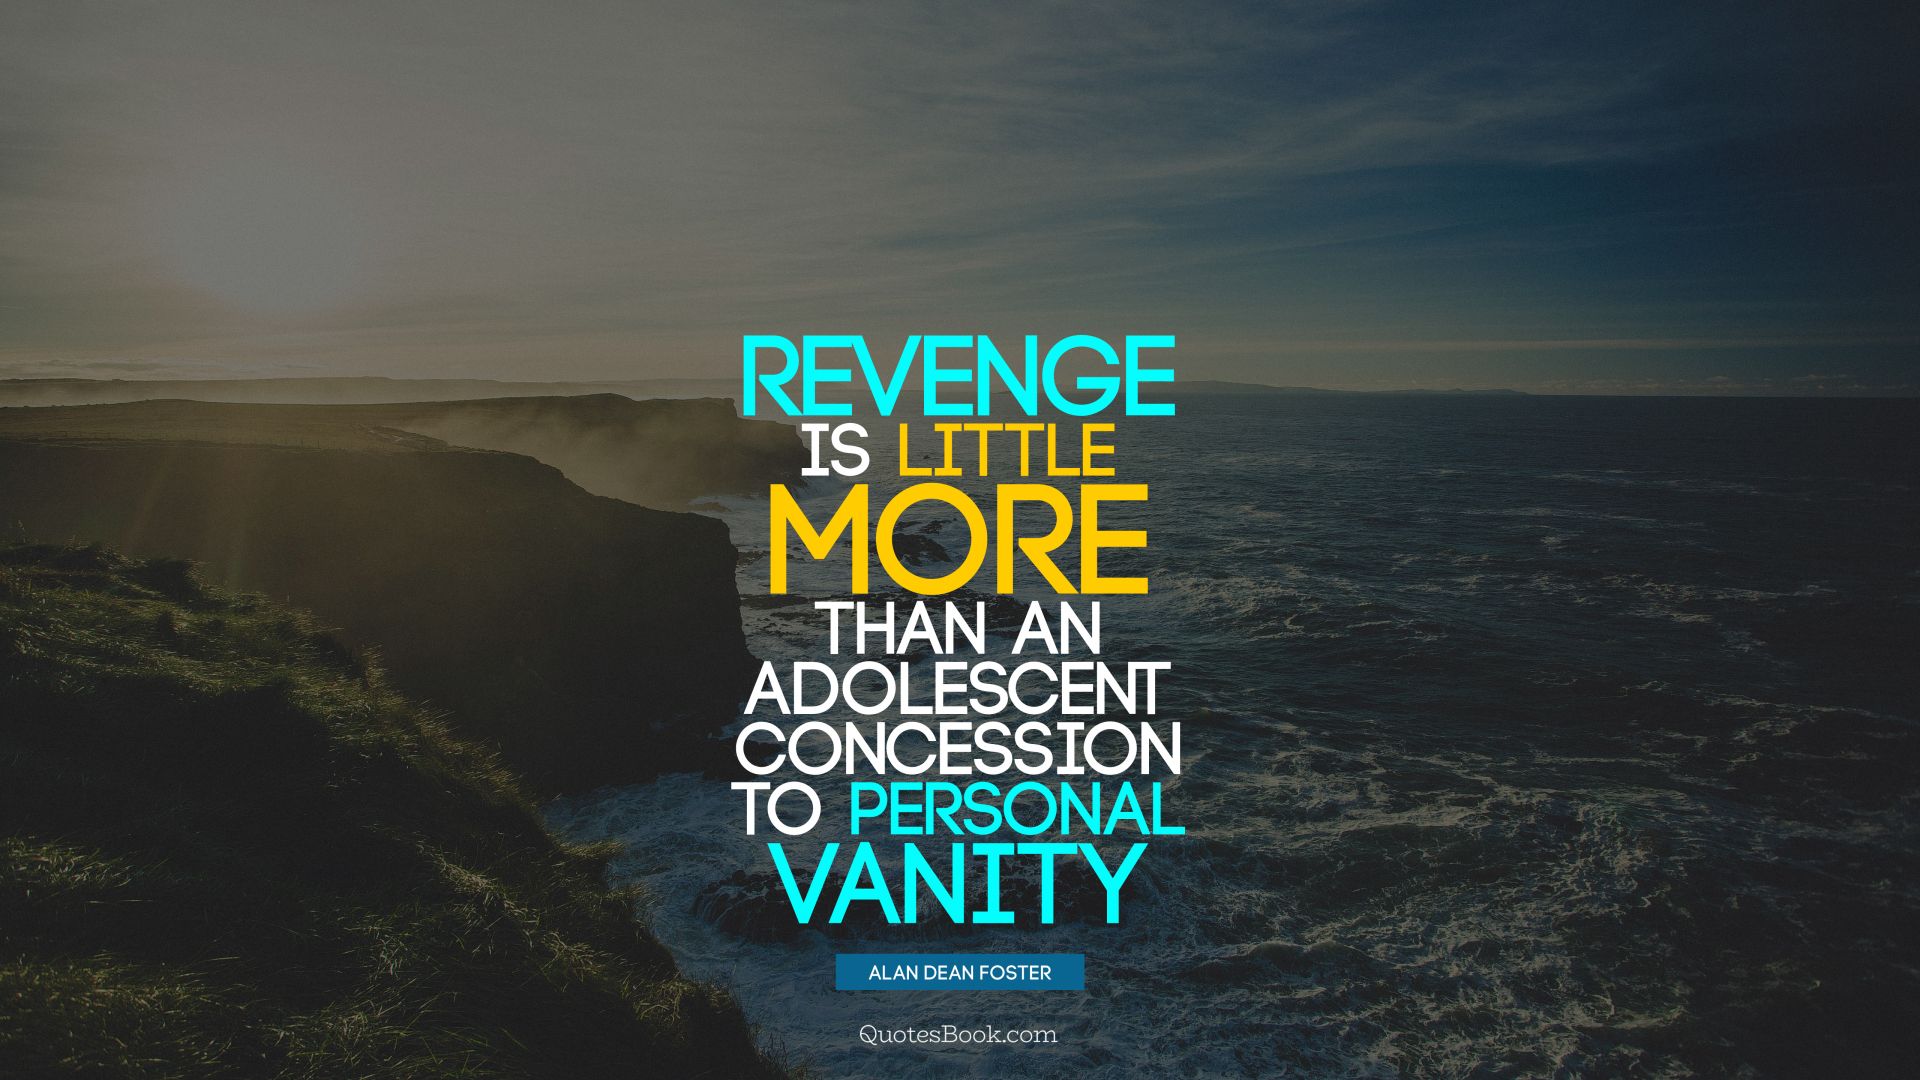 Revenge is little more than an adolescent concession to personal vanity. - Quote by Alan Dean Foster